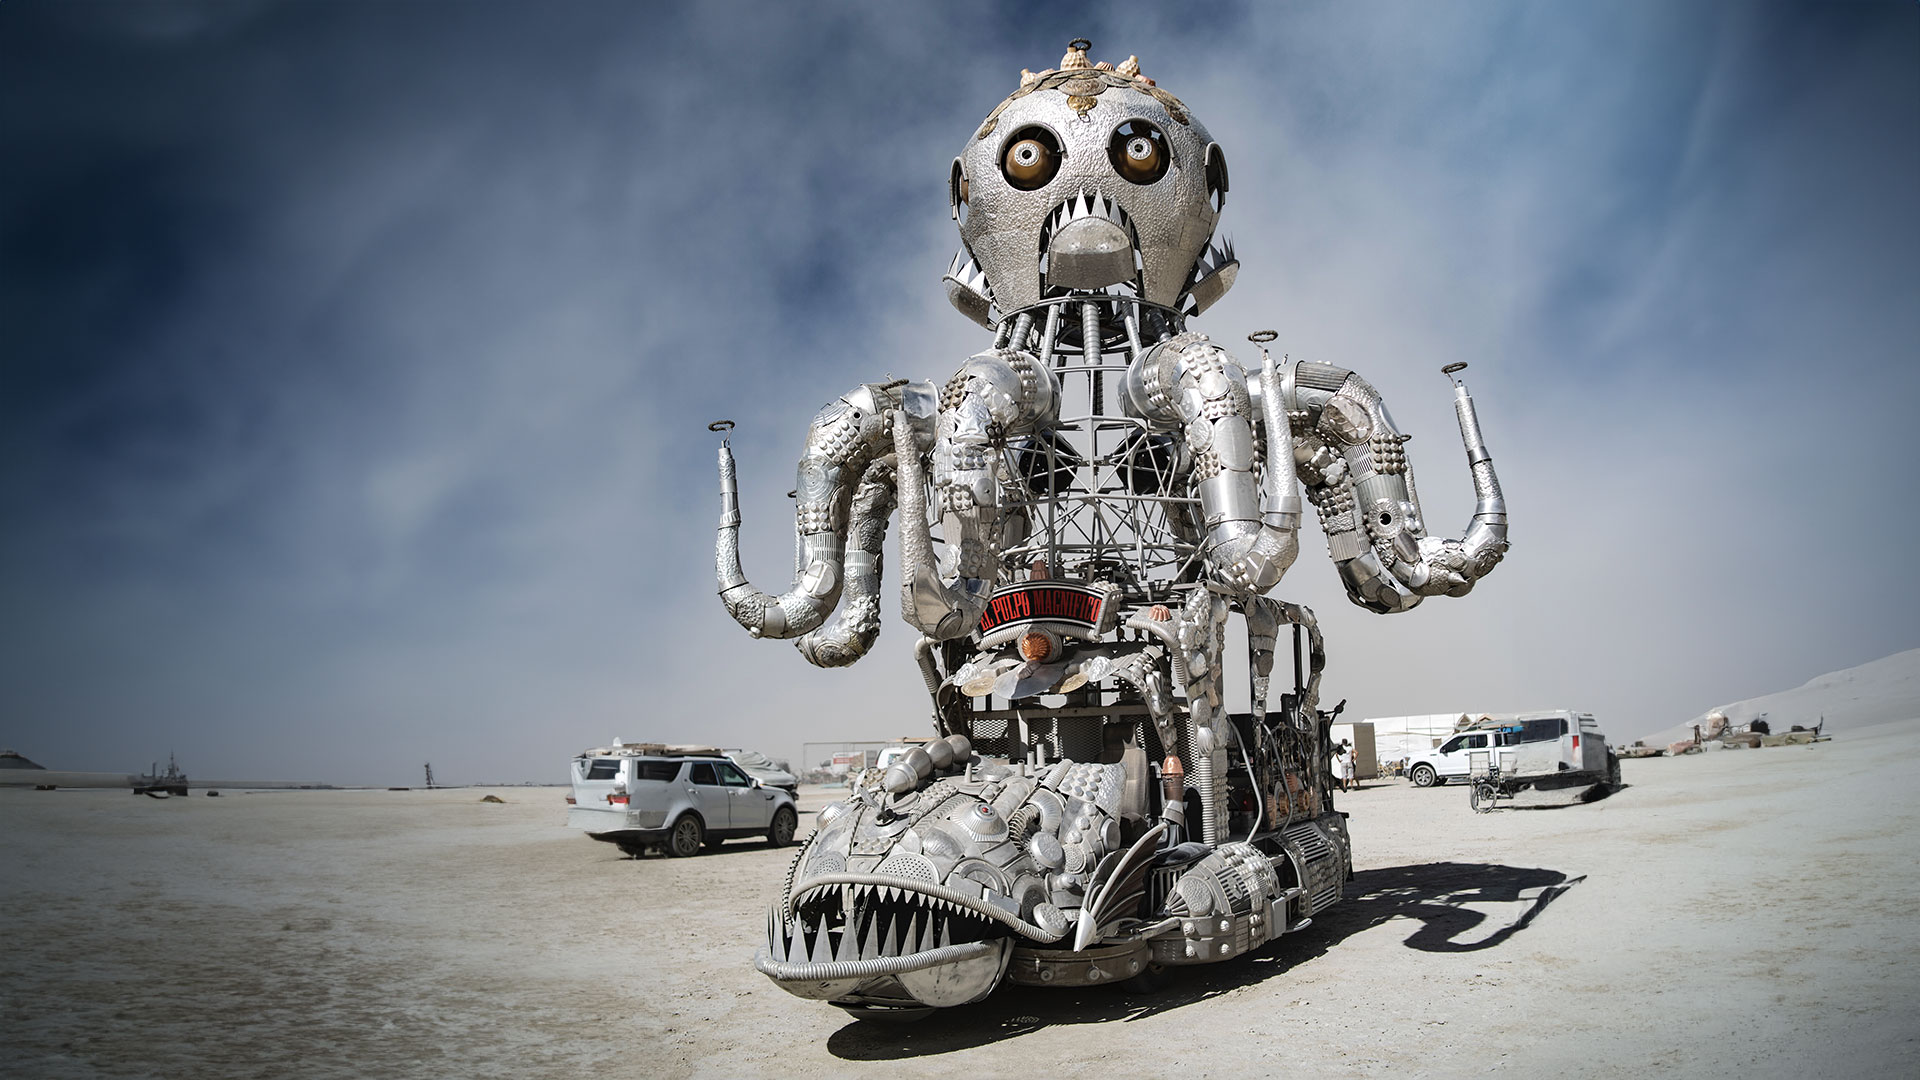 How to Get to Burning Man